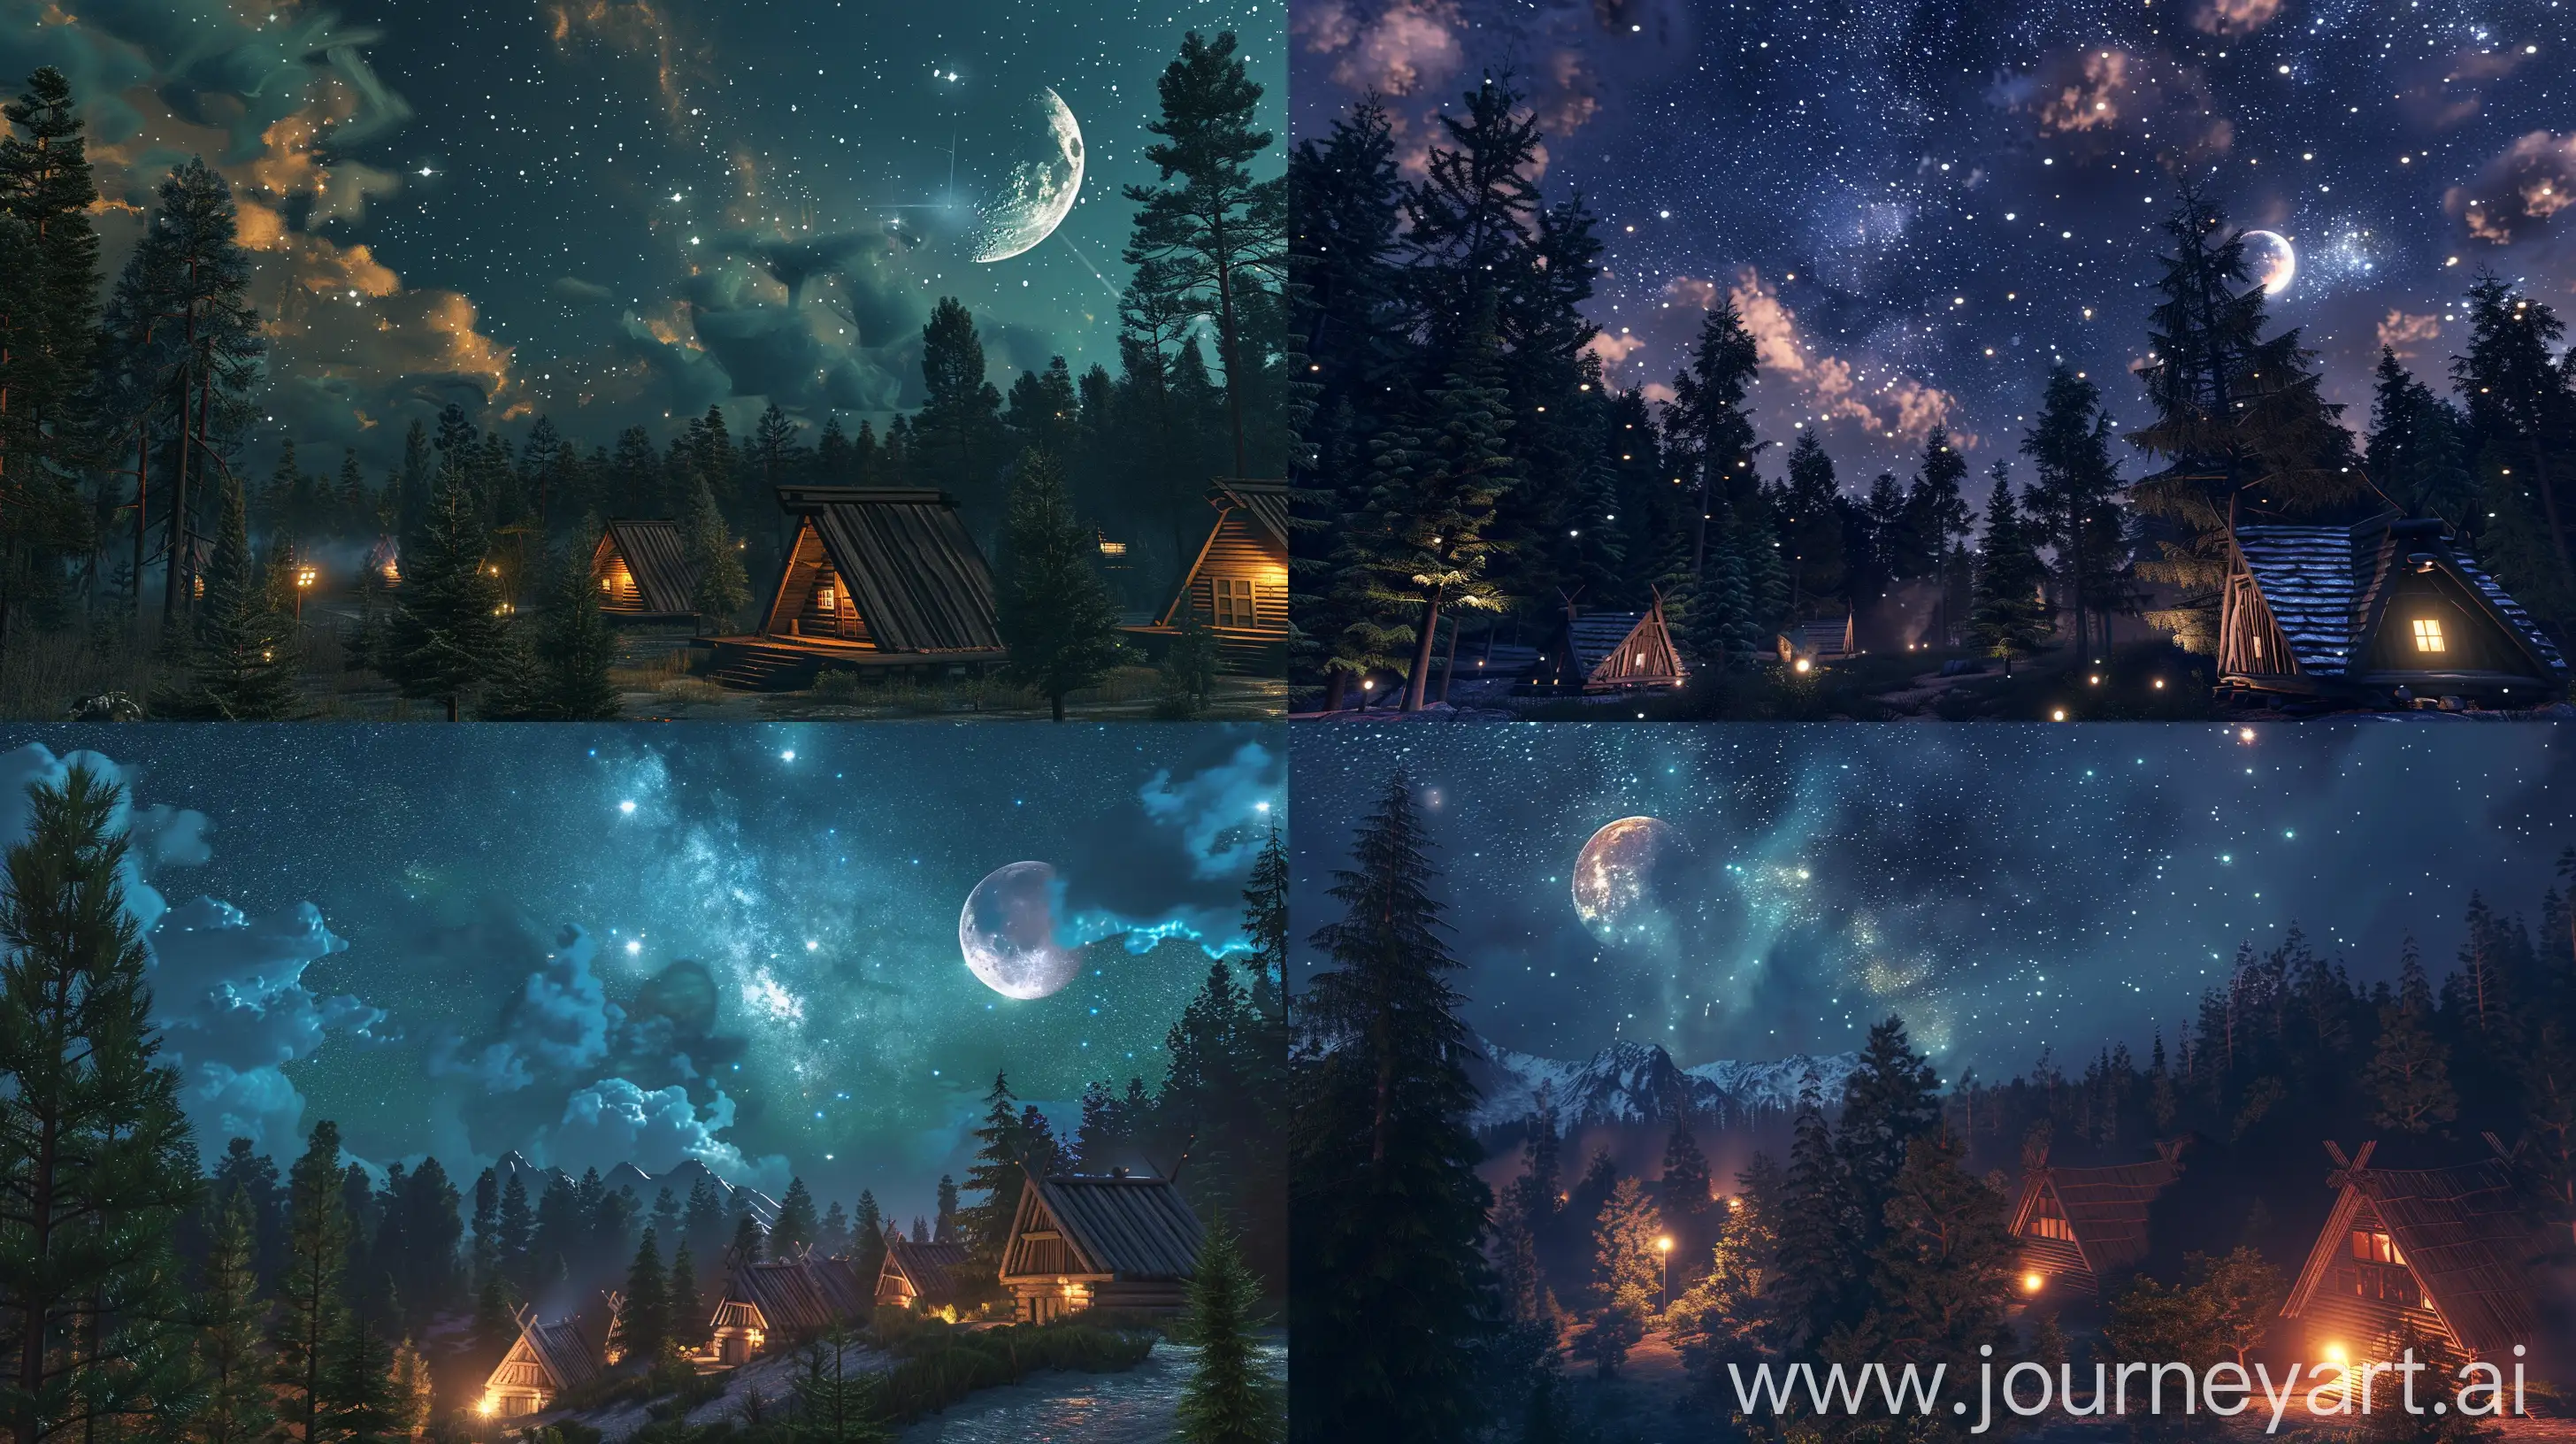 Landscape, night, moon, partly cloudy, starry skies, forests, wooden huts, bright lights, pine and pin-shaped trees, North American forests, realistic, bottom-up viewing angles --ar 16:9 